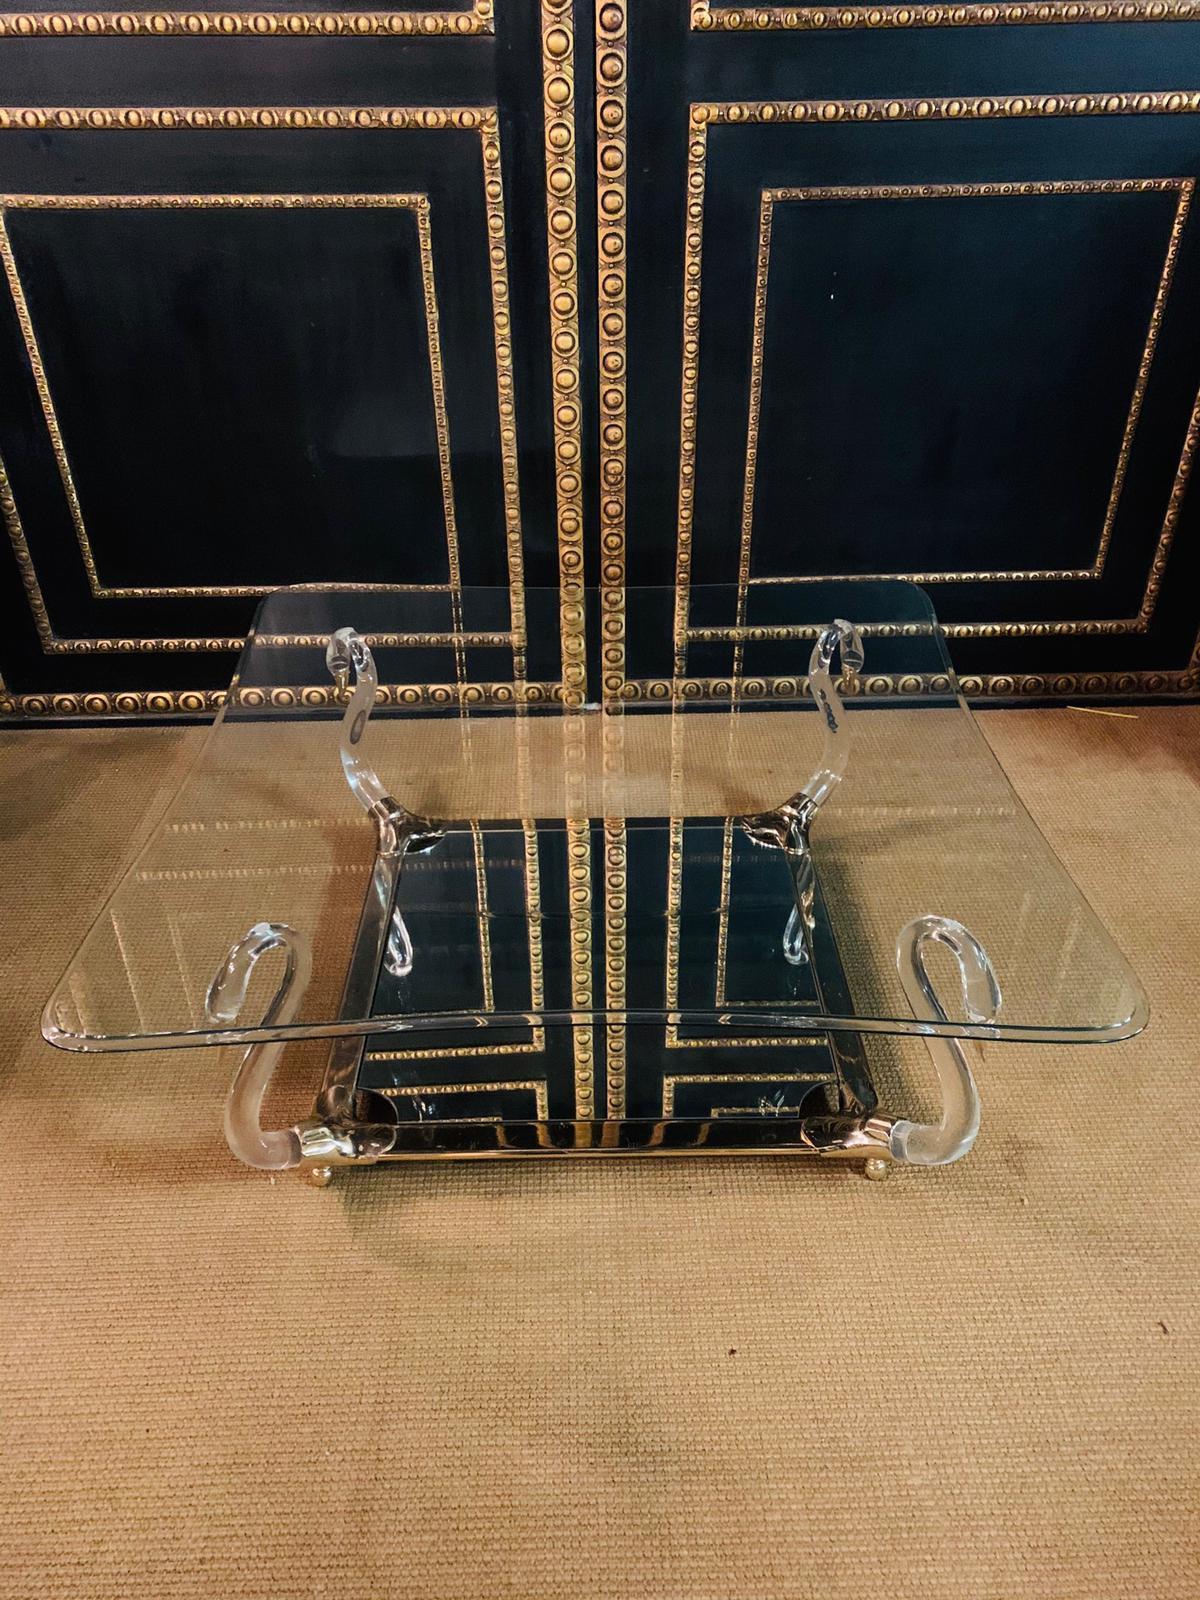 Made in Italy
Coffee table with 4 swans in acrylic connected with a brass frame.
Beautiful curved glass plate
Below with mirror.
The glass plate and mirror have a small chip.
Minimal scratches on the brass and
Glass plate.